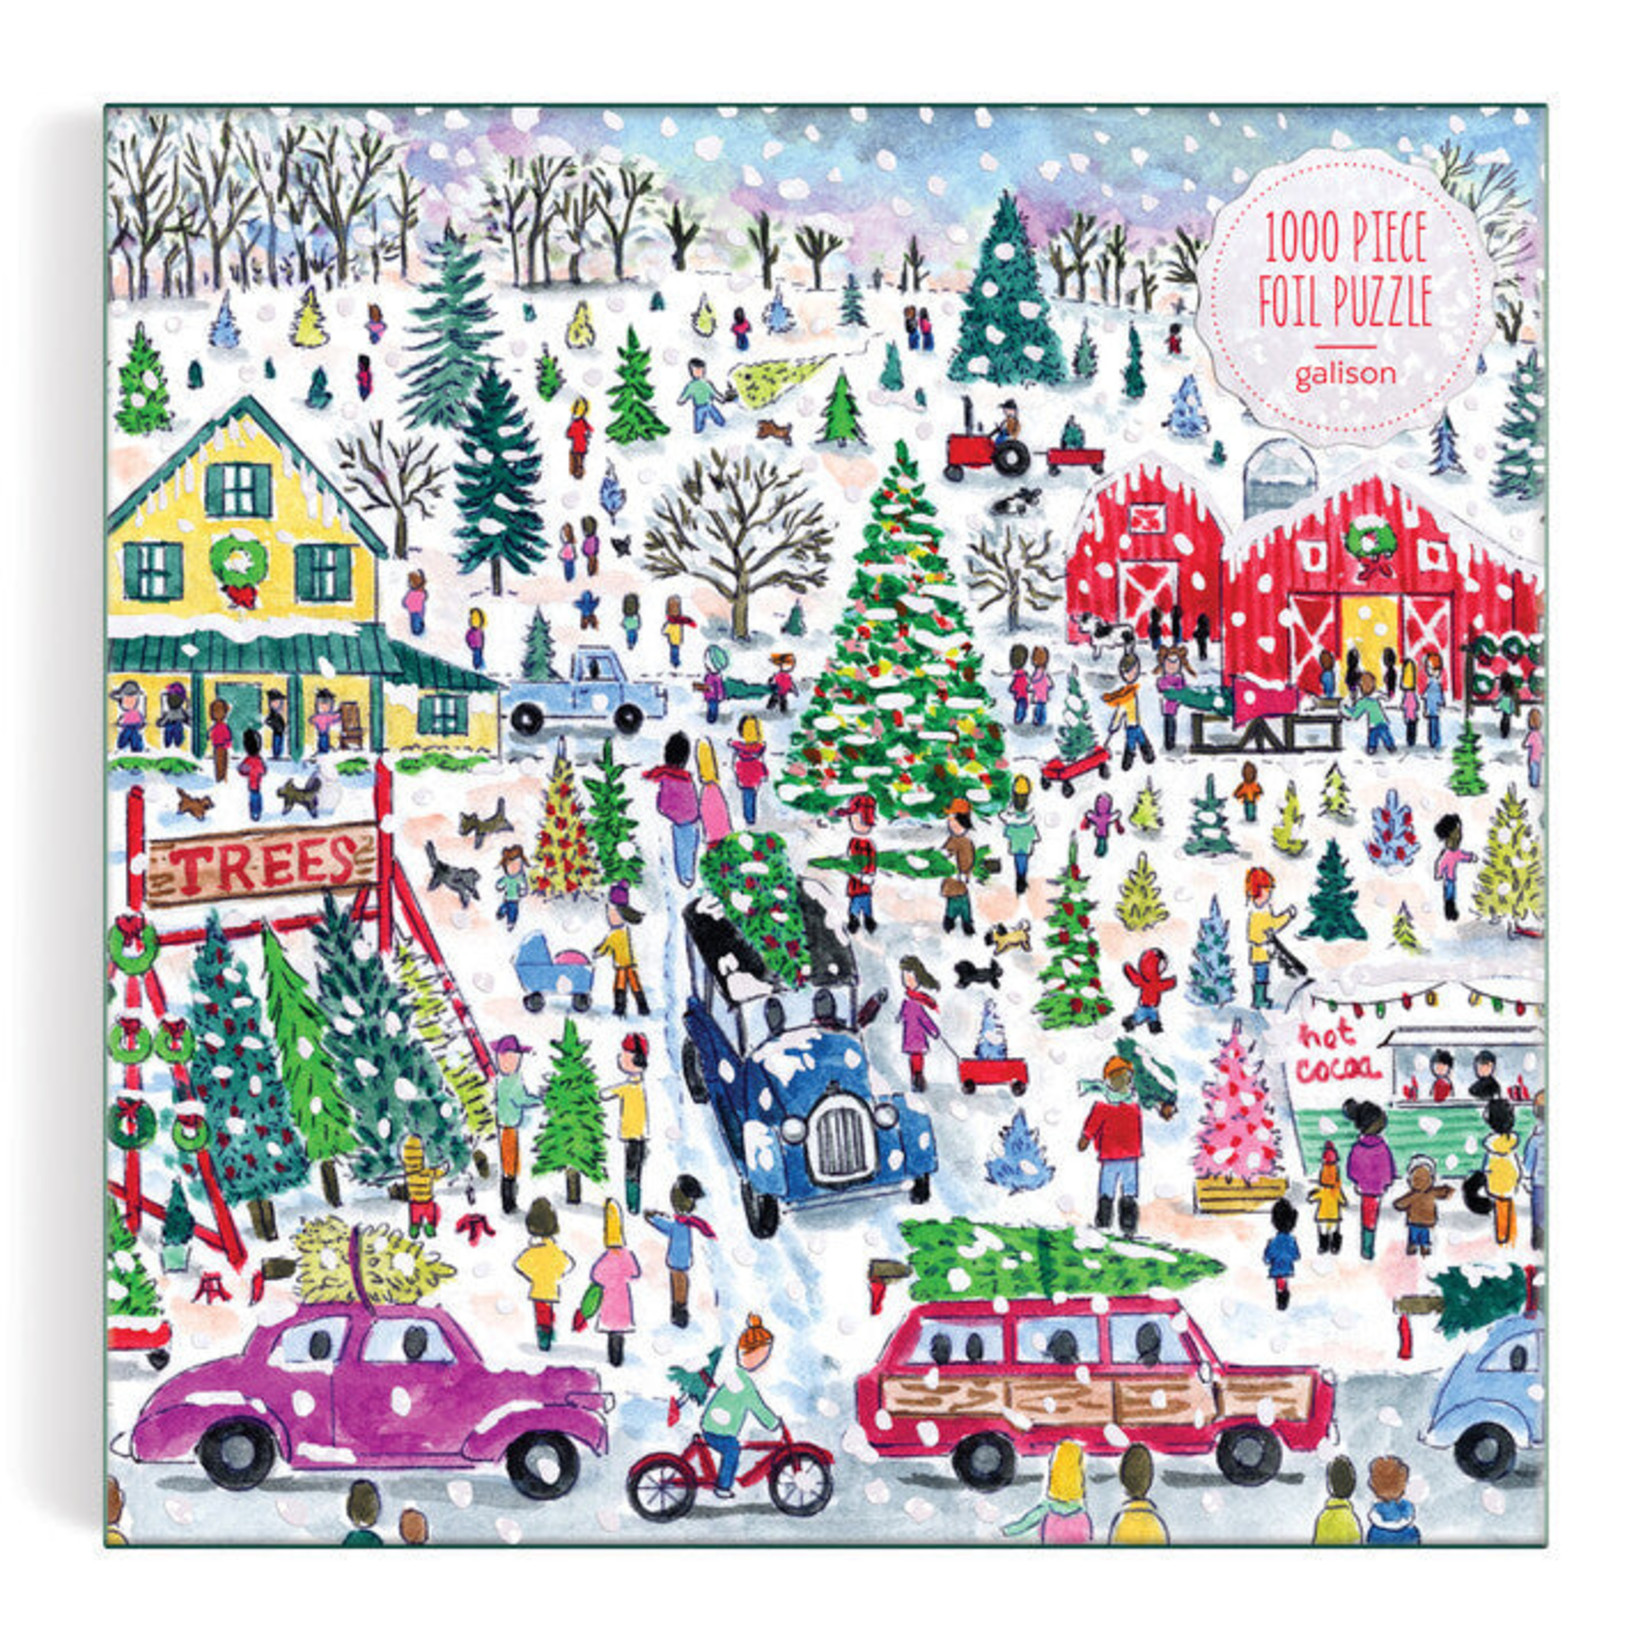 Hachette Book Group A Day At The Christmas Tree Farm 1000 Piece Foil Puzzle